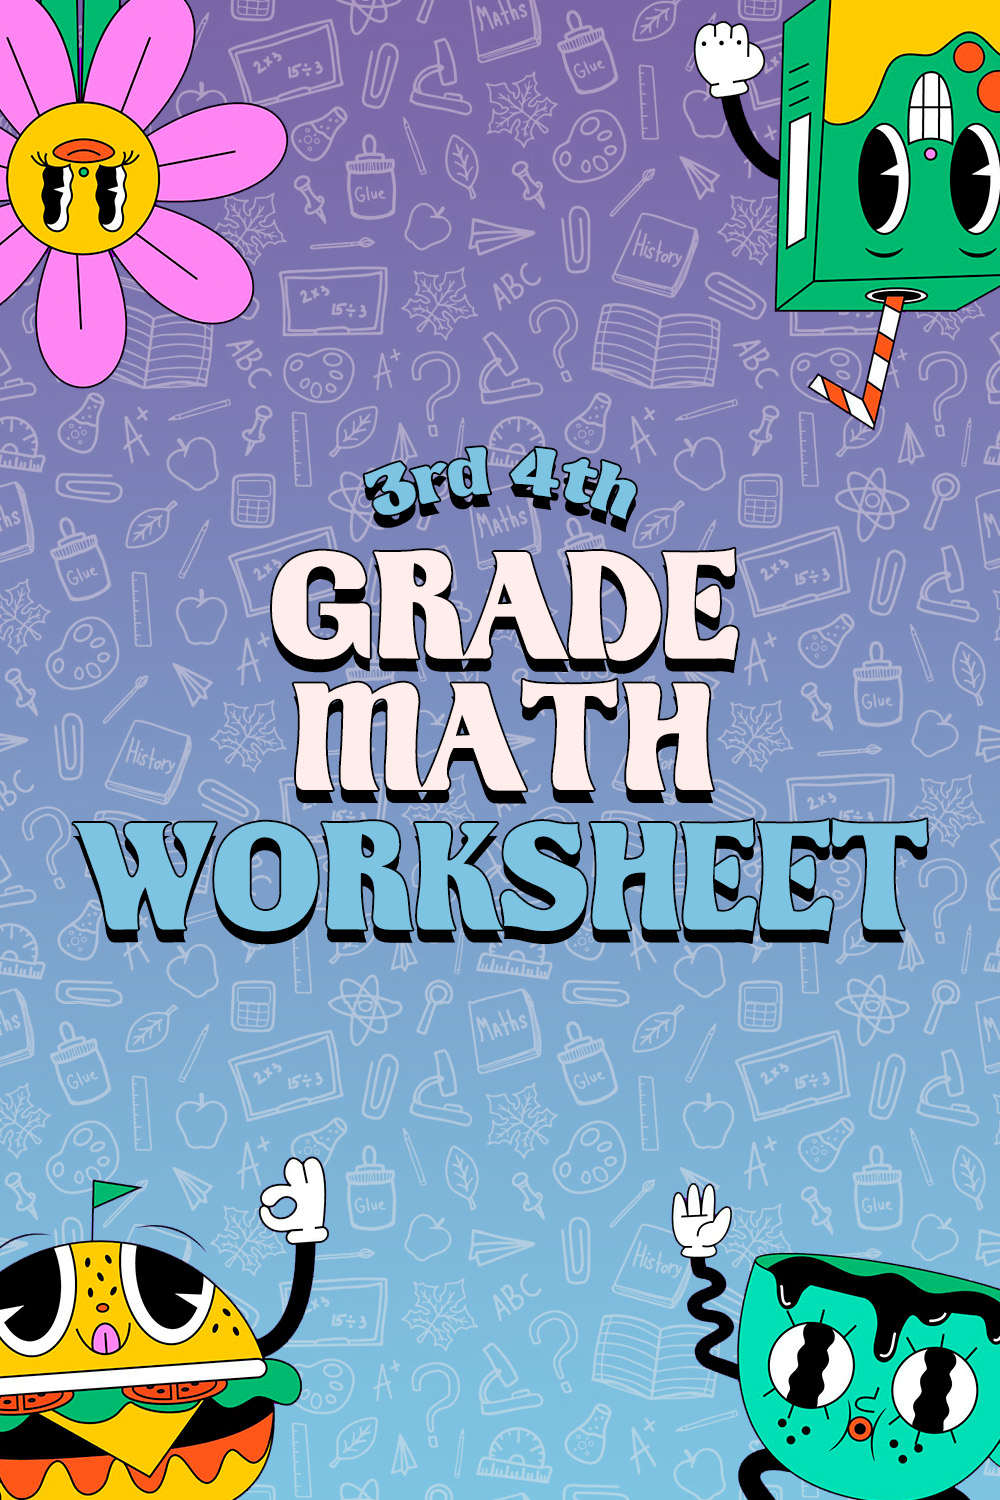 15 Images of 3rd 4th Grade Math Worksheets